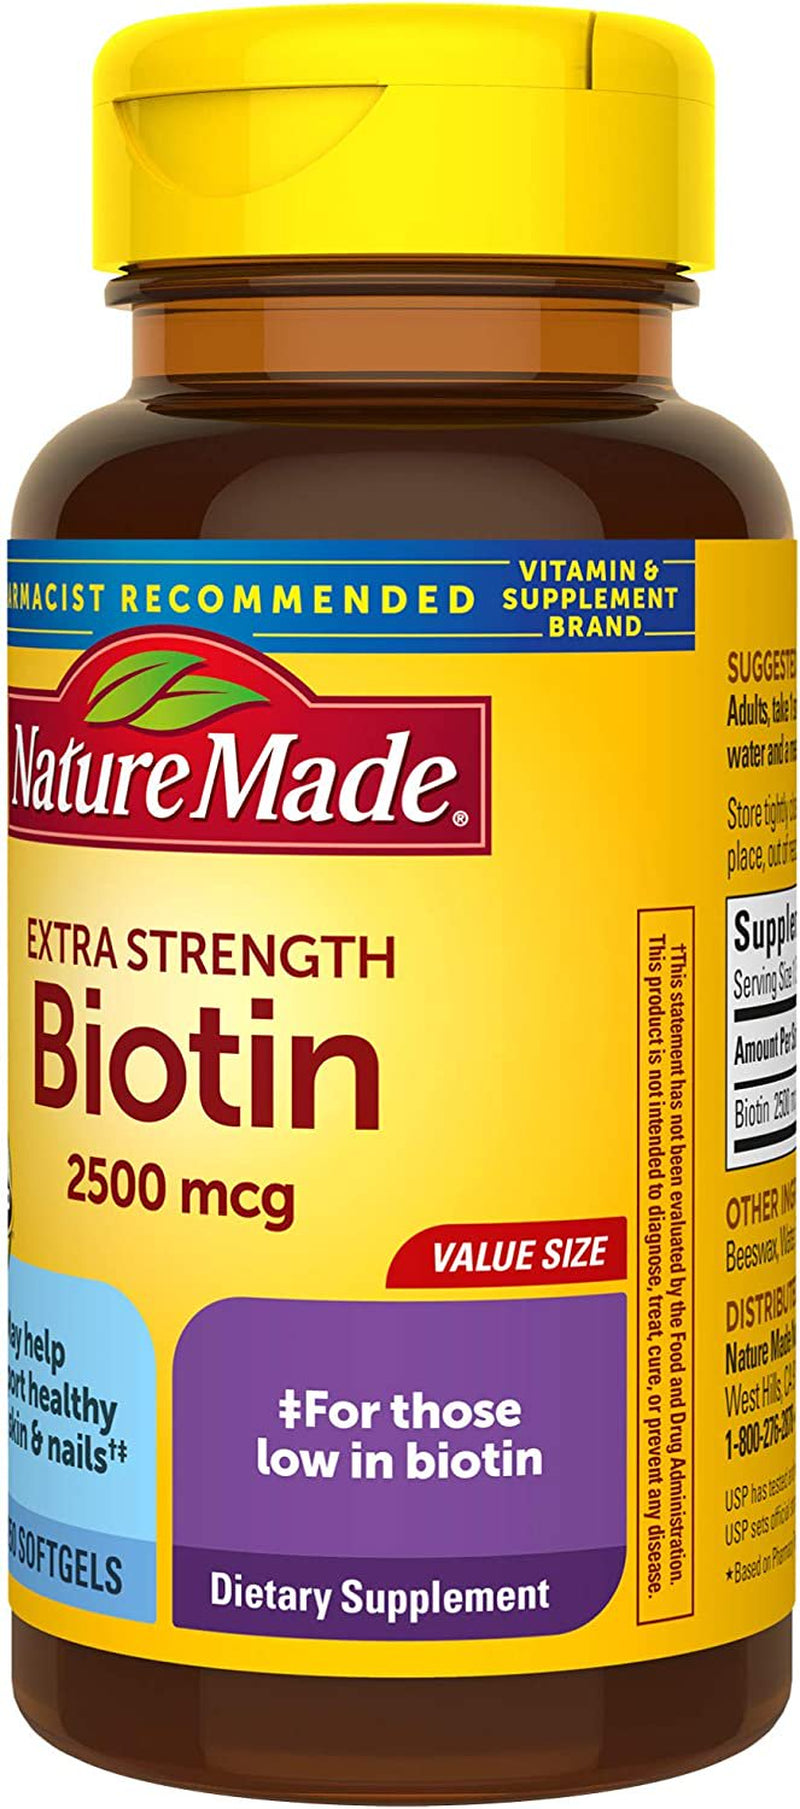 Strength Biotin 2500 Mcg, Dietary Supplement for Healthy Hair, Skin & Nail Support, 150 Softgels, 150 Day Supply